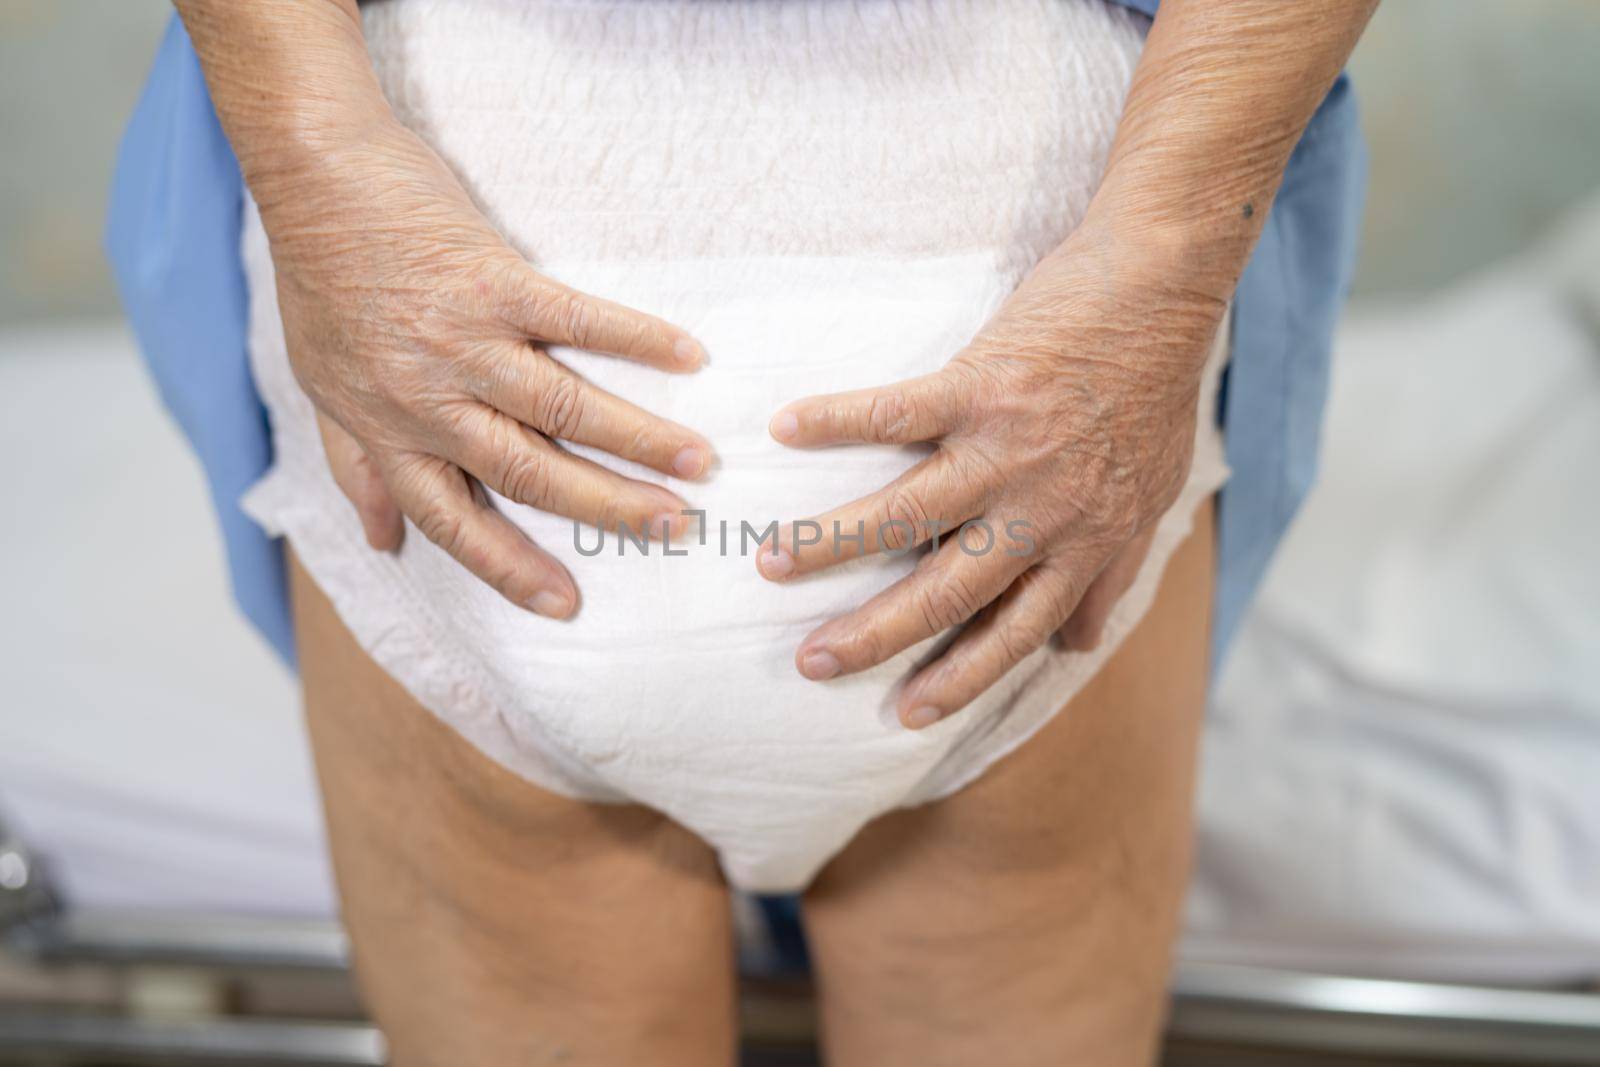 Asian senior or elderly old lady woman patient wearing incontinence diaper in nursing hospital ward, healthy strong medical concept.